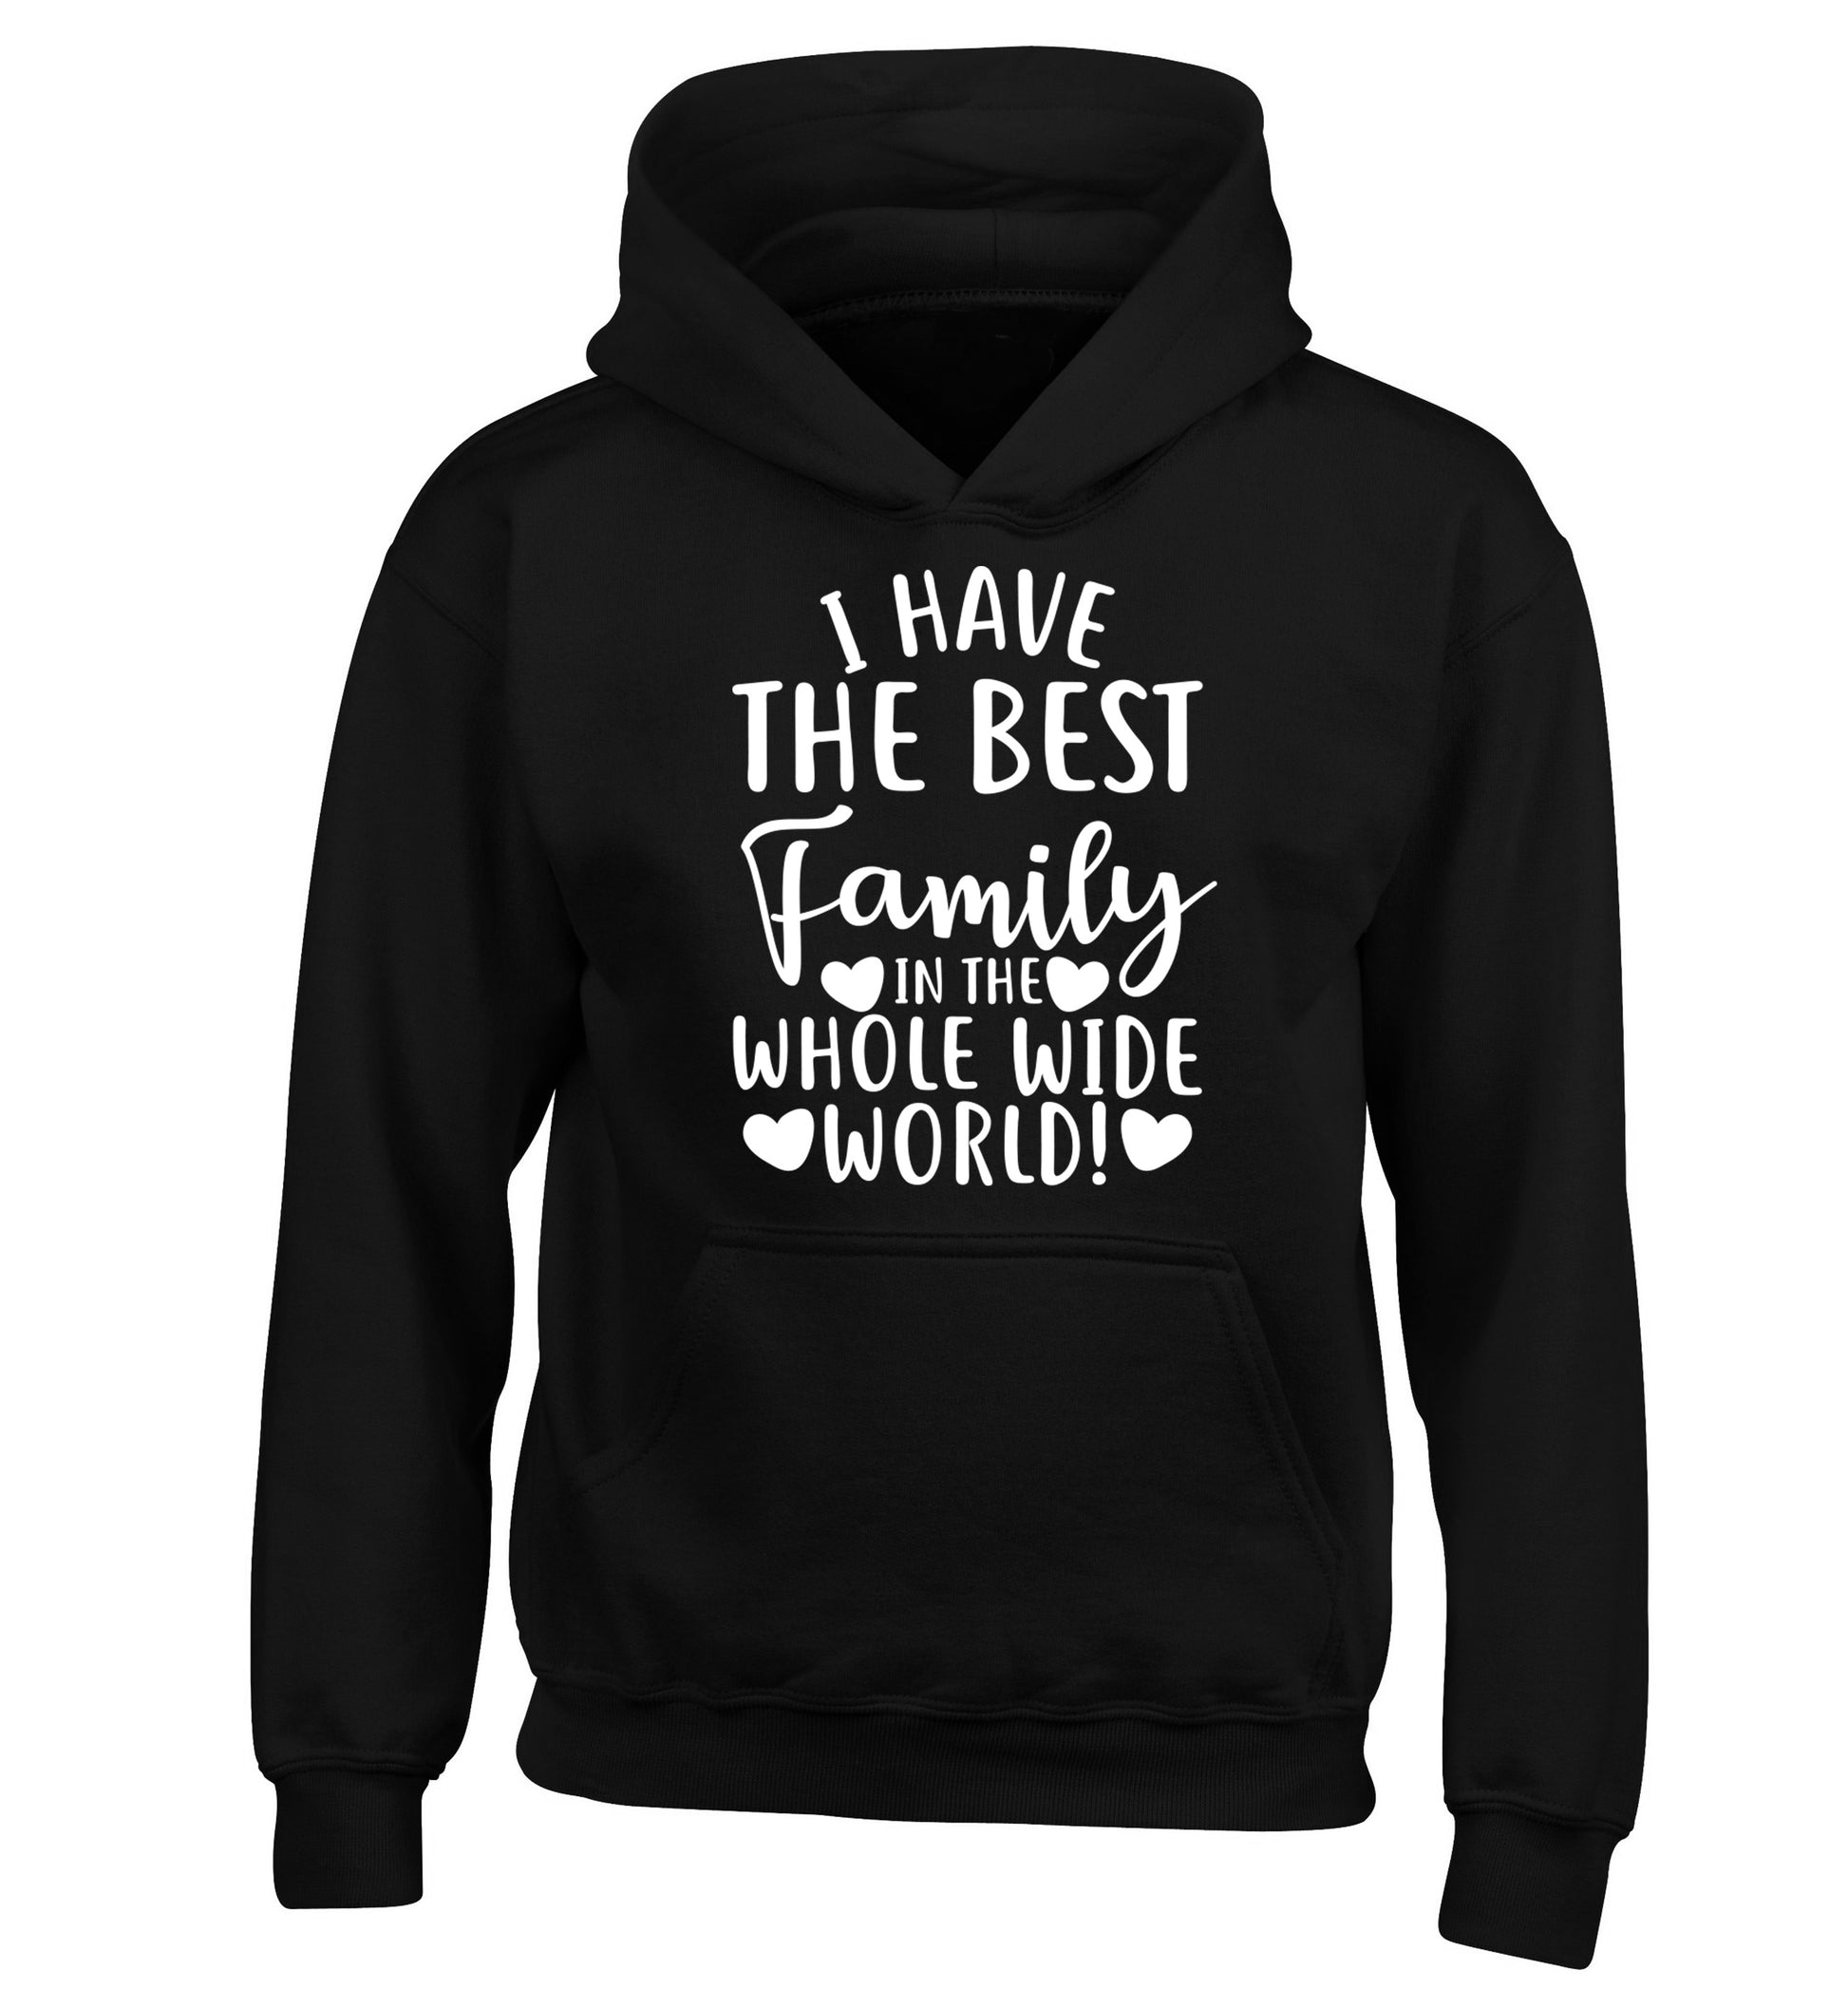 I have the best family in the whole wide world! children's black hoodie 12-13 Years